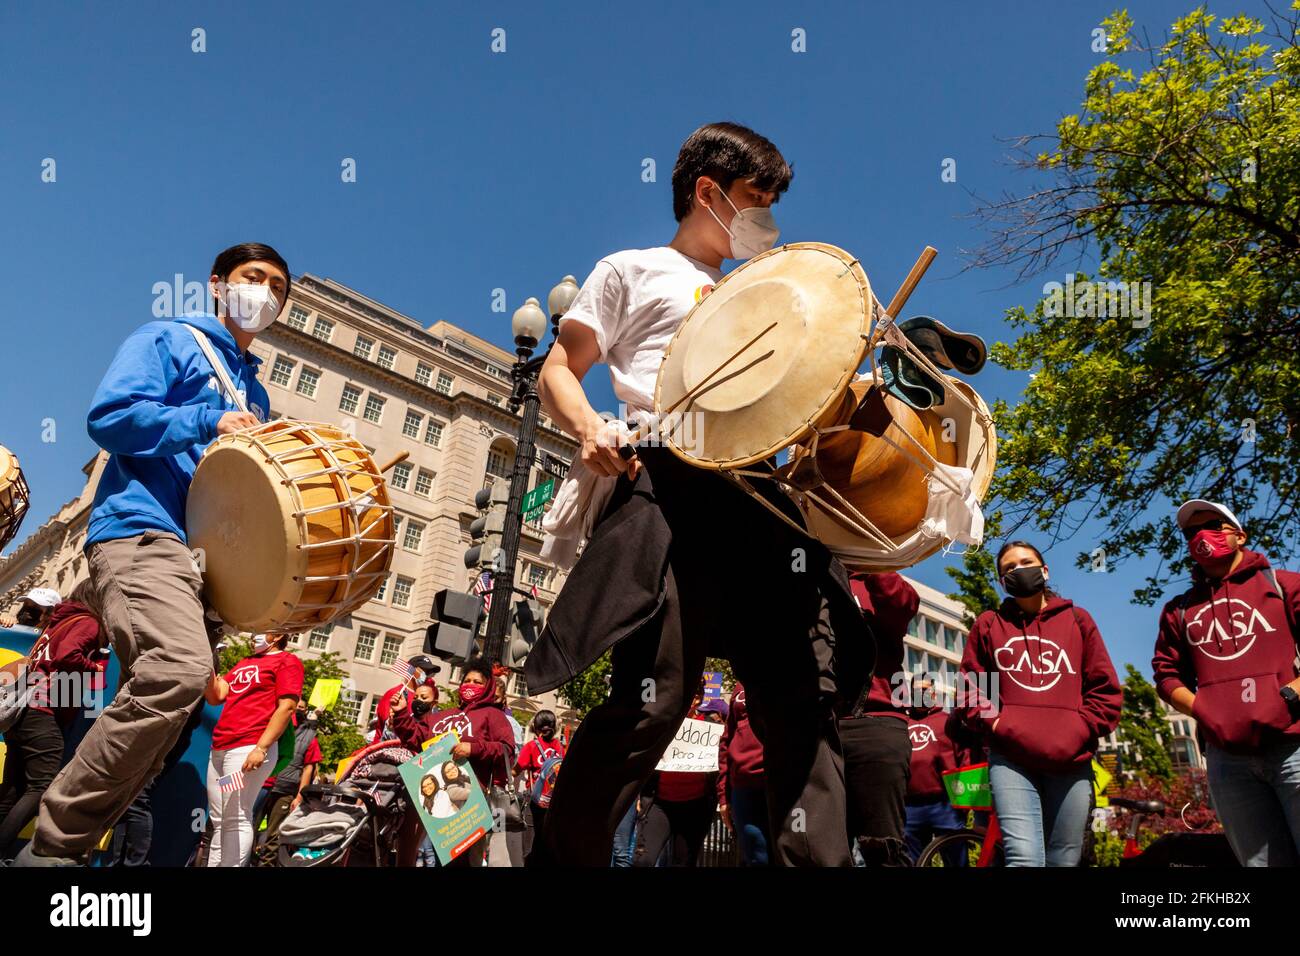 Washington, DC, United States, 1 May, 2021.  Pictured: Over a thousand people and a number of organizations demand immigration reform and citizenship for the 11 million undocumented immigrants in the US.  Credit: Allison C Bailey / Alamy Live News Stock Photo